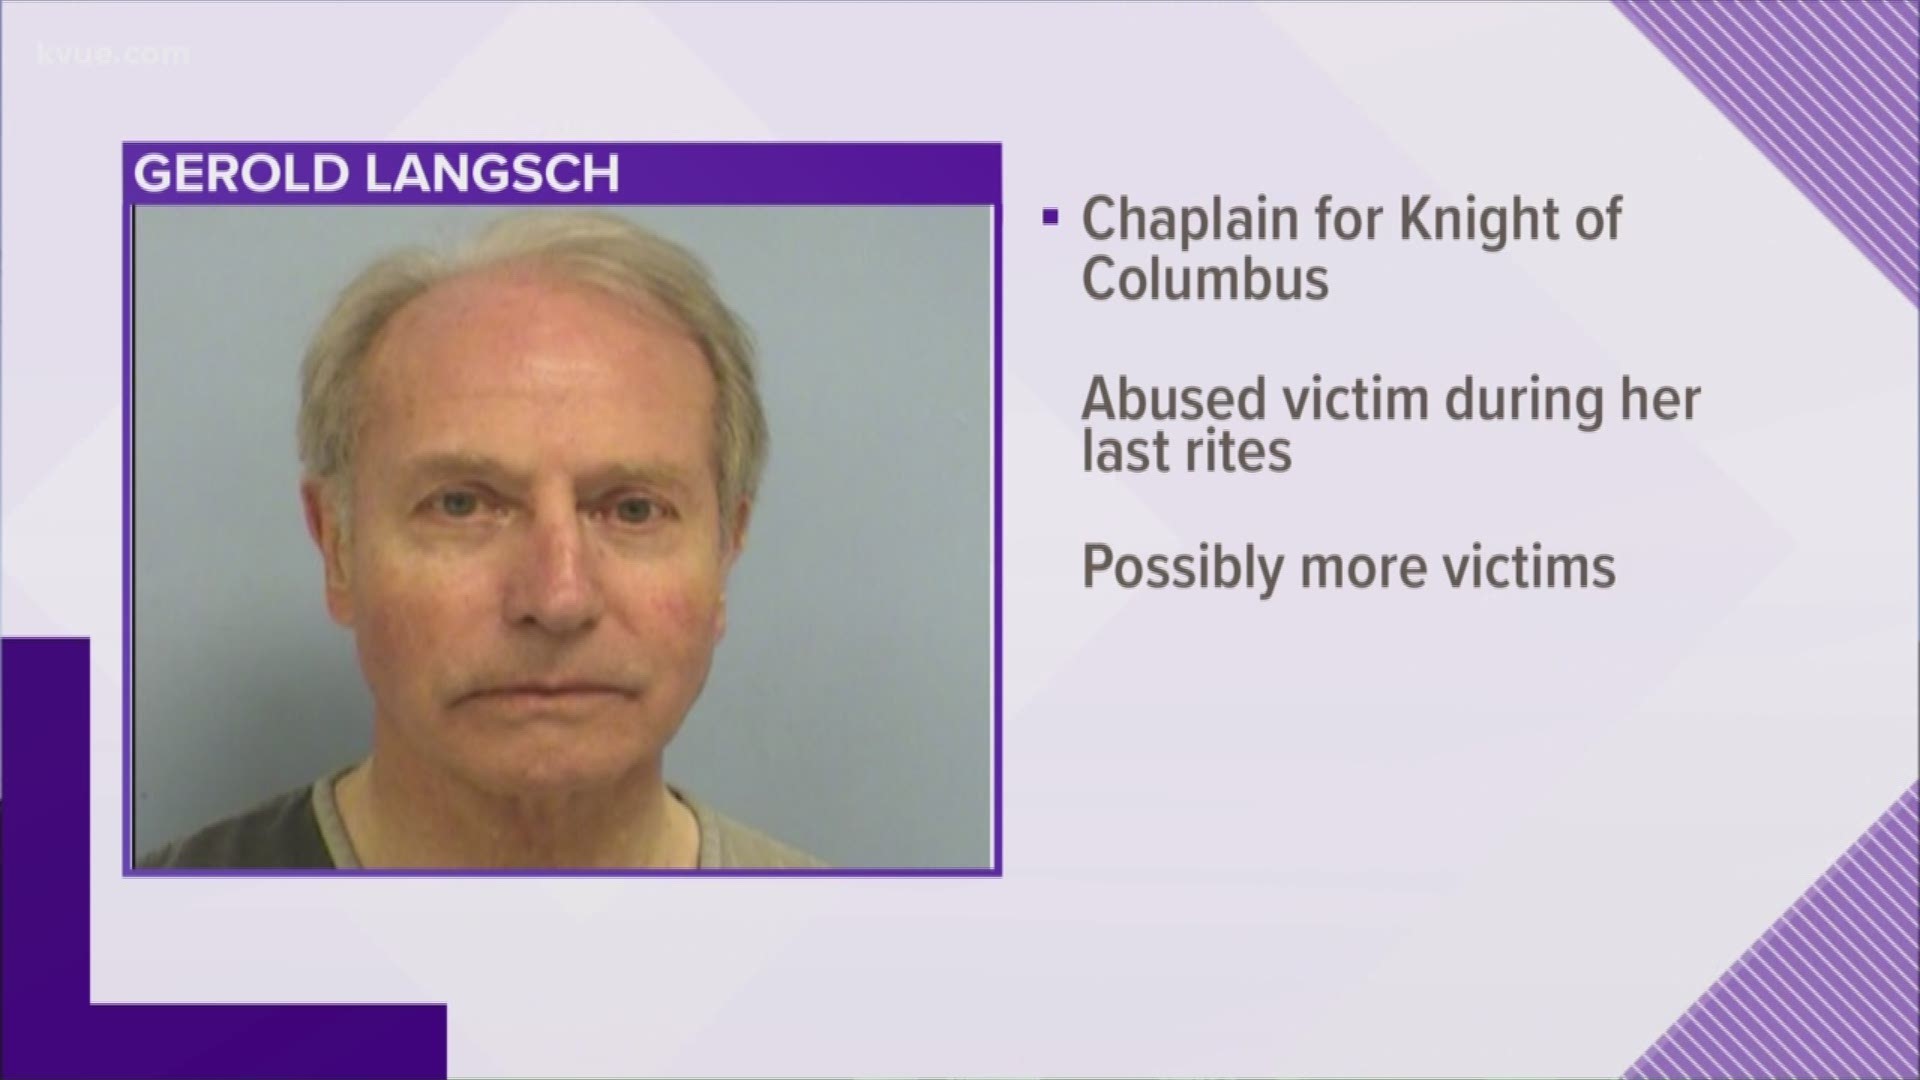 Gerold Langsch is accused of inappropriately touching a woman in hospice care as he was administering last rights.